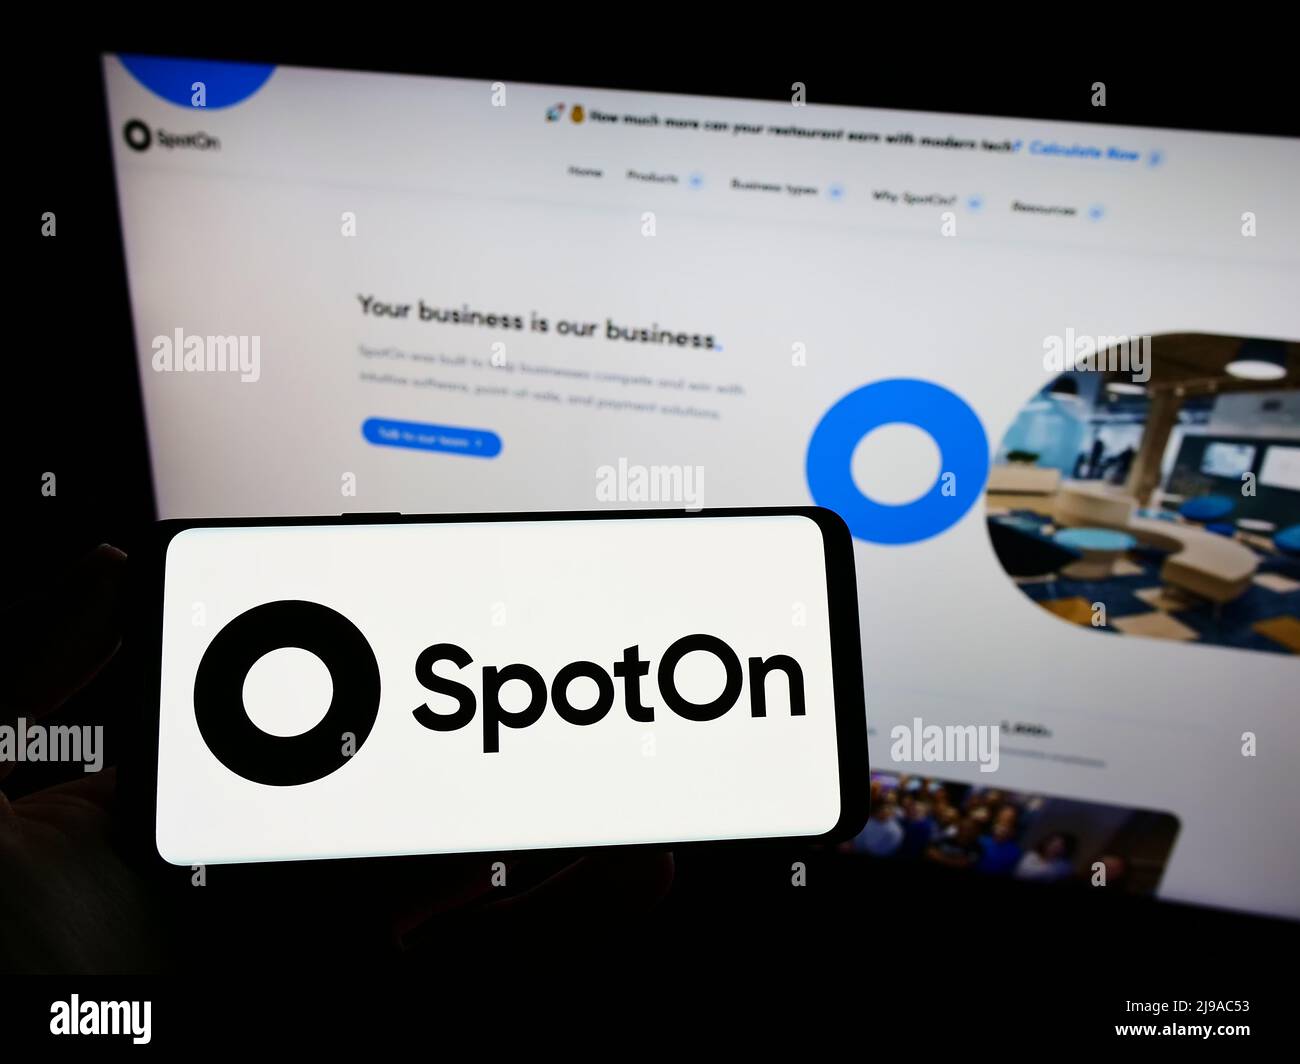 Person holding smartphone with logo of US software company SpotOn Transact LLC on screen in front of website. Focus on phone display. Stock Photo